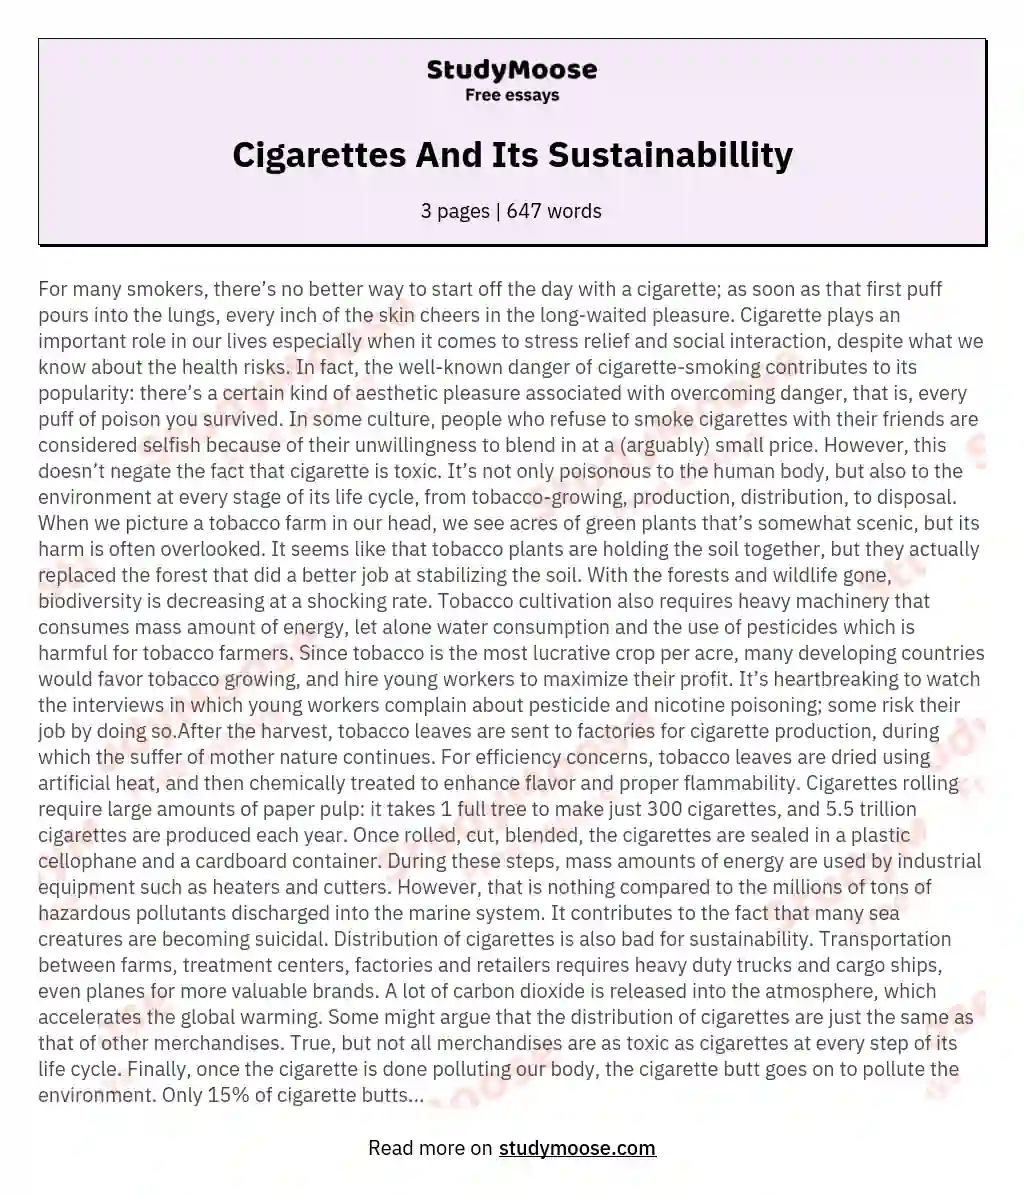 Cigarettes And Its Sustainabillity essay